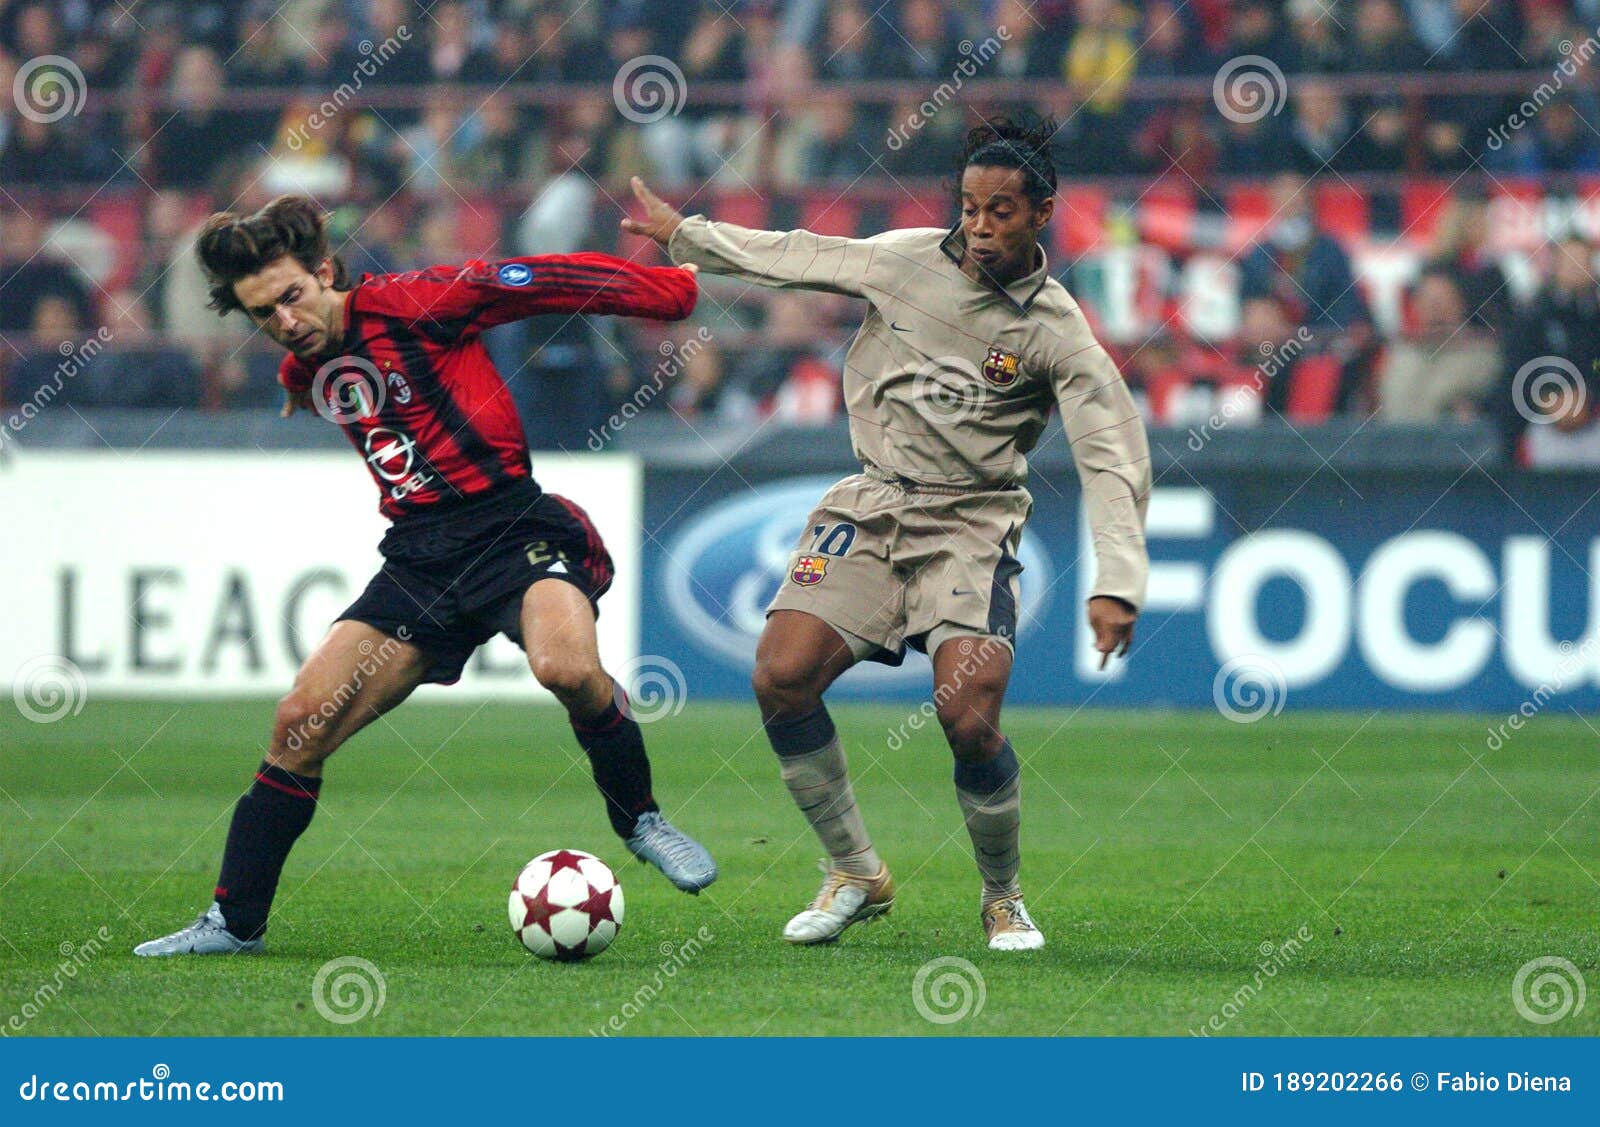 Ronaldinho and Andrea Pirlo in Action during the Match Editorial Photo -  Image of football, match: 189202266